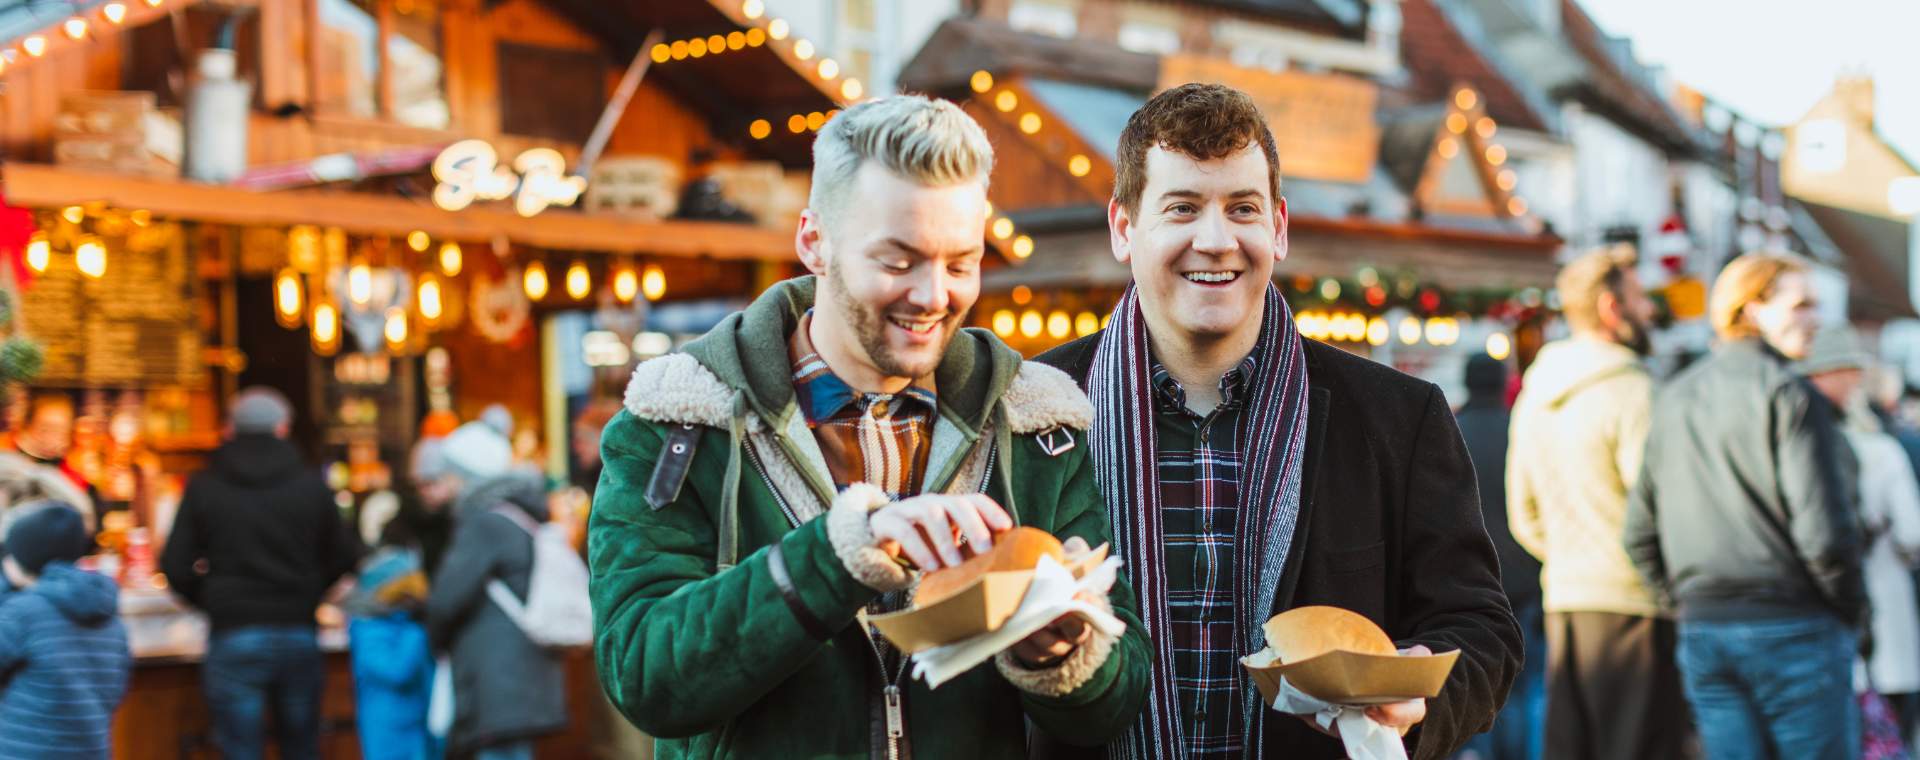 Two men stood in front of illuminated food stalls at the Beverley Festival of Christmas in East Yorkshire, about to tuck into carvery sandwiches